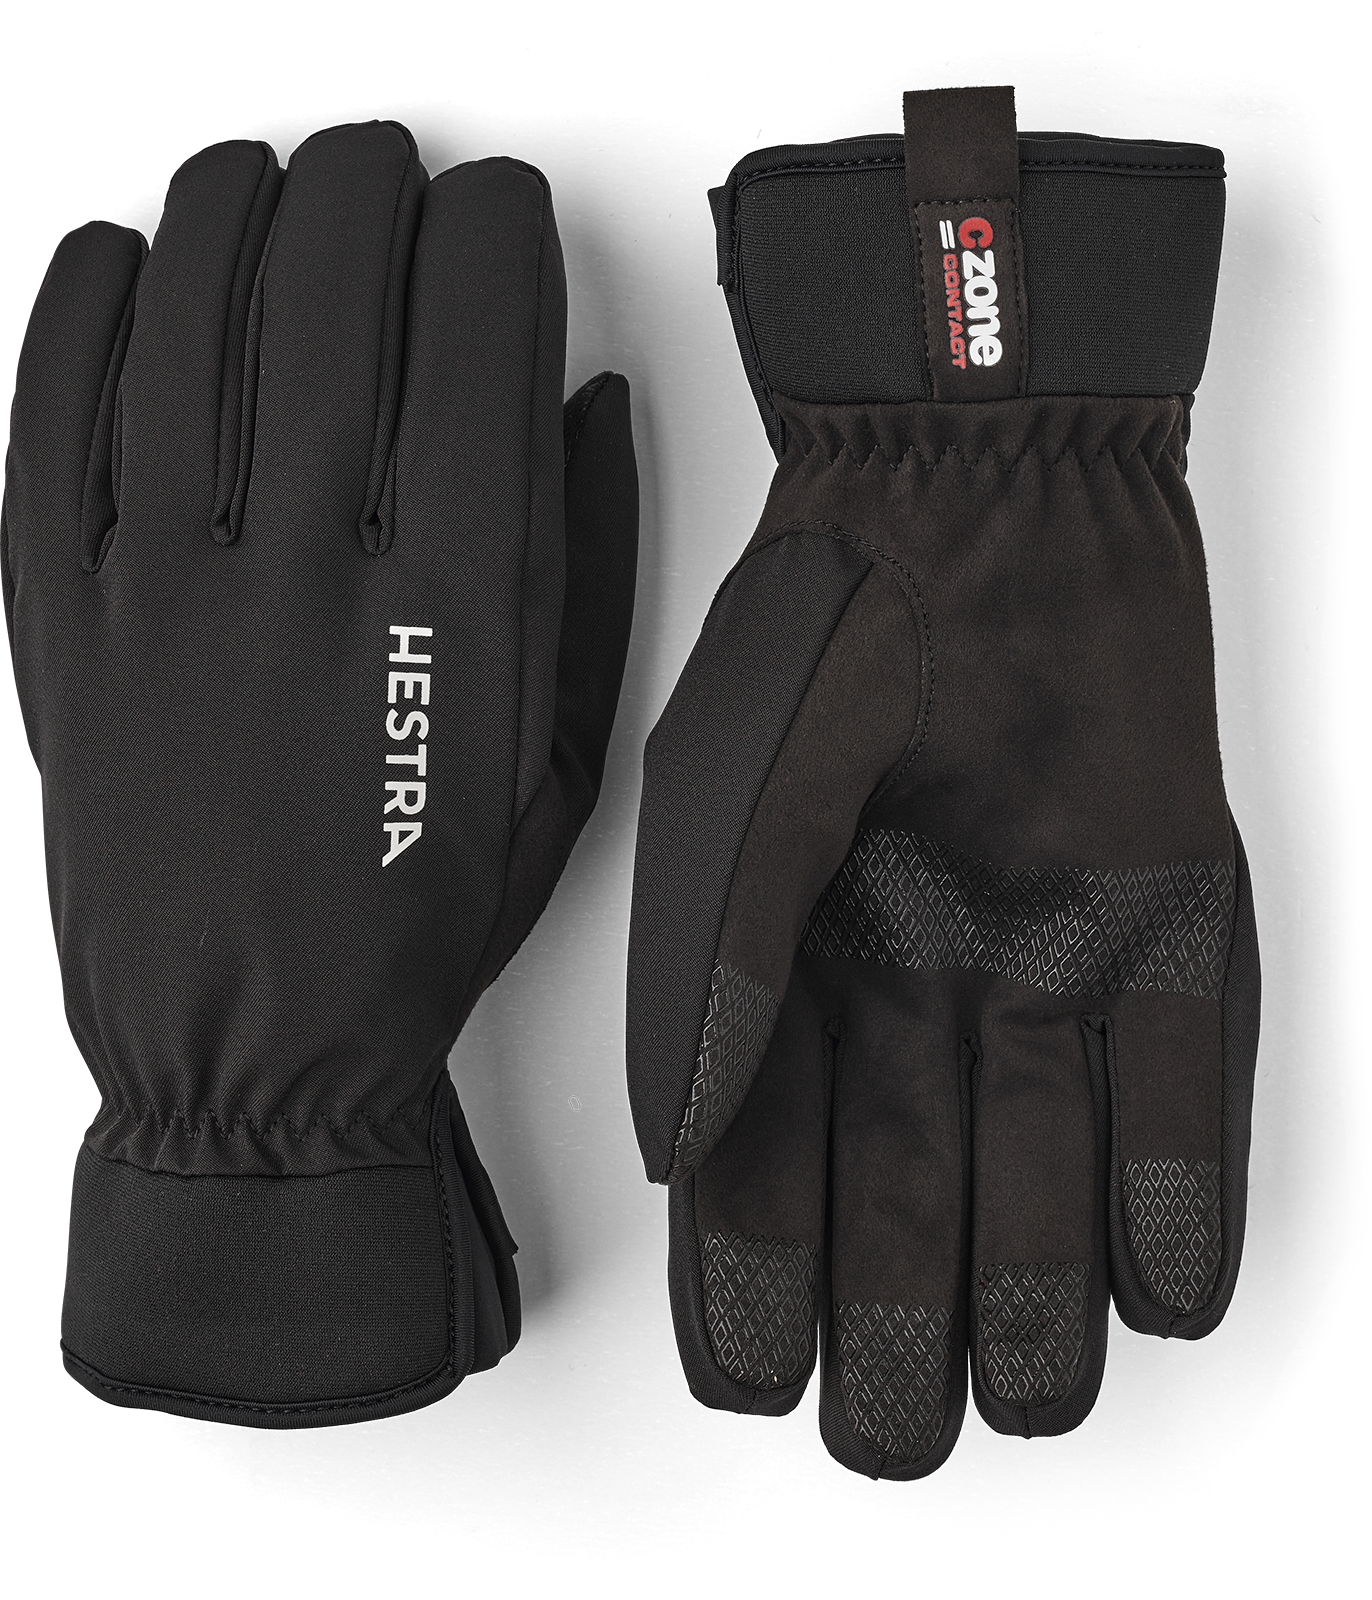 Hestra CZone Contact Glove 5 finger